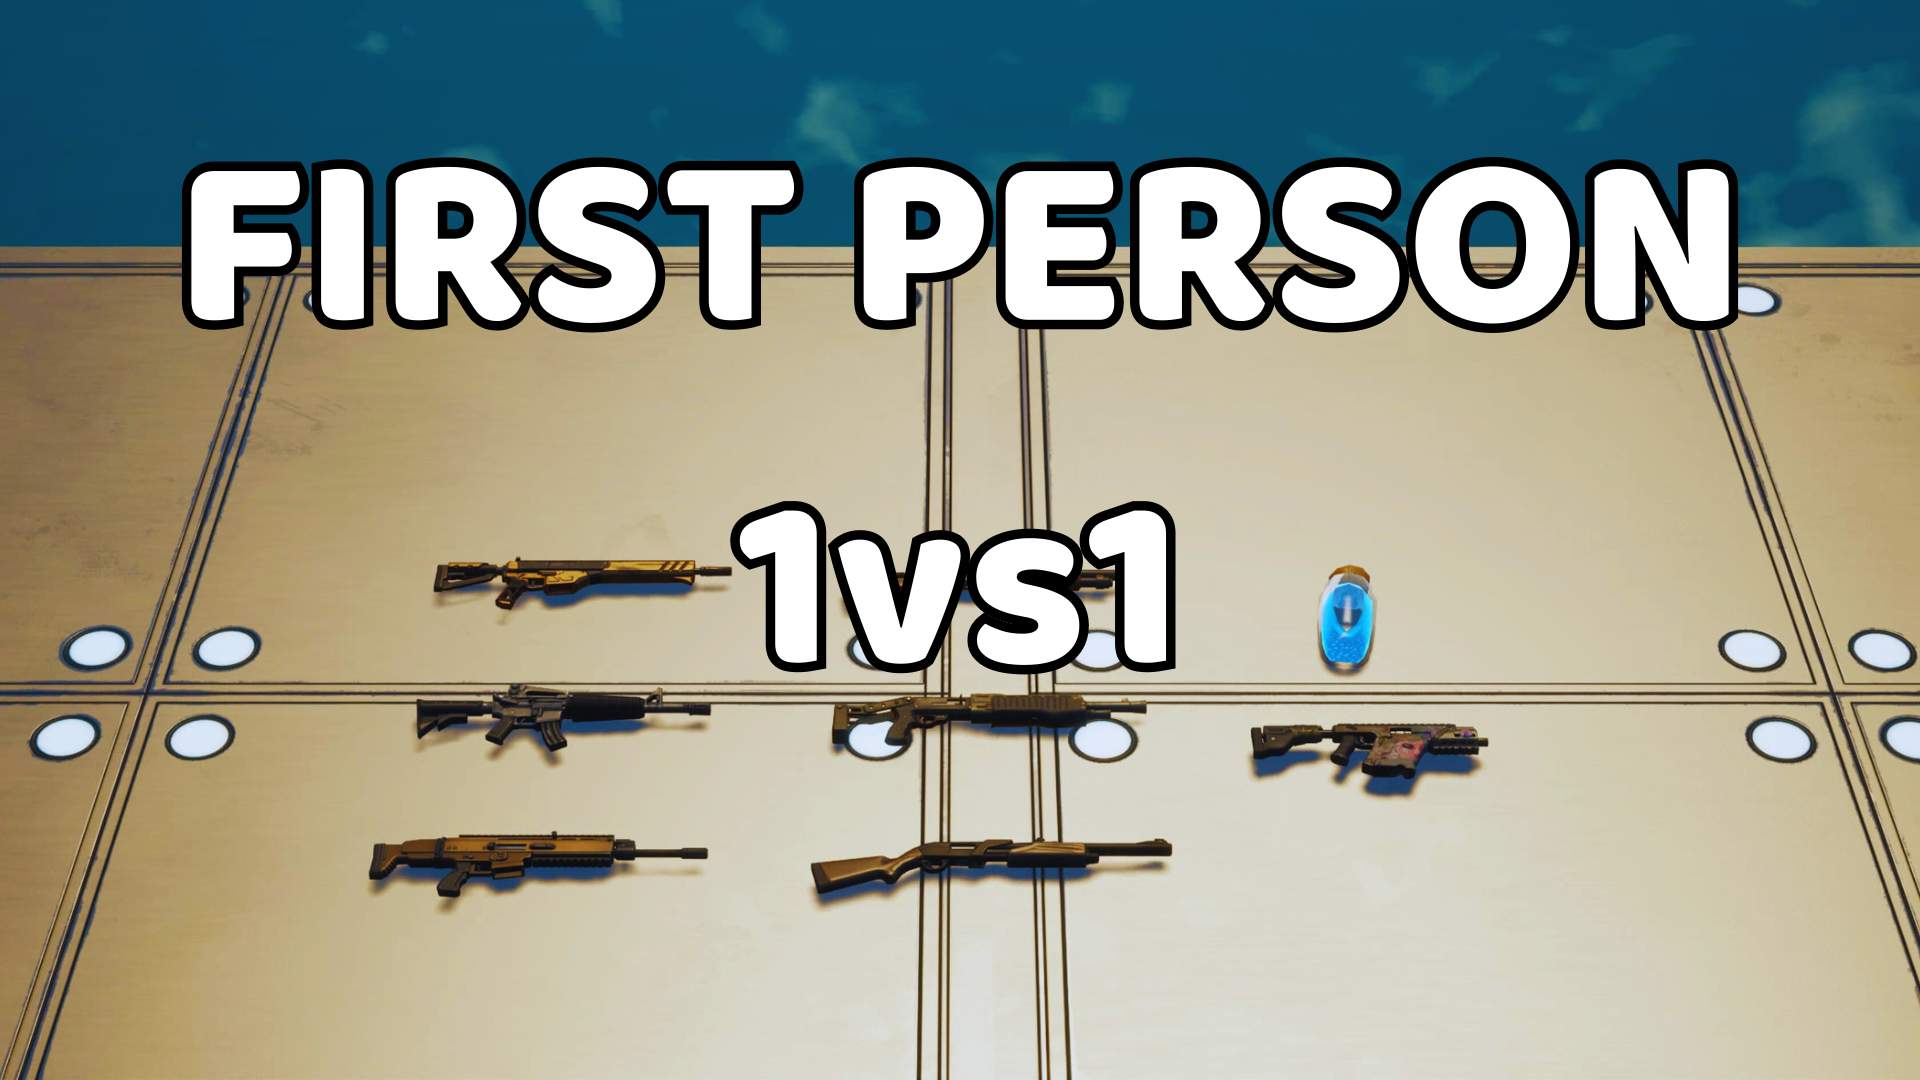 First Person 1v1